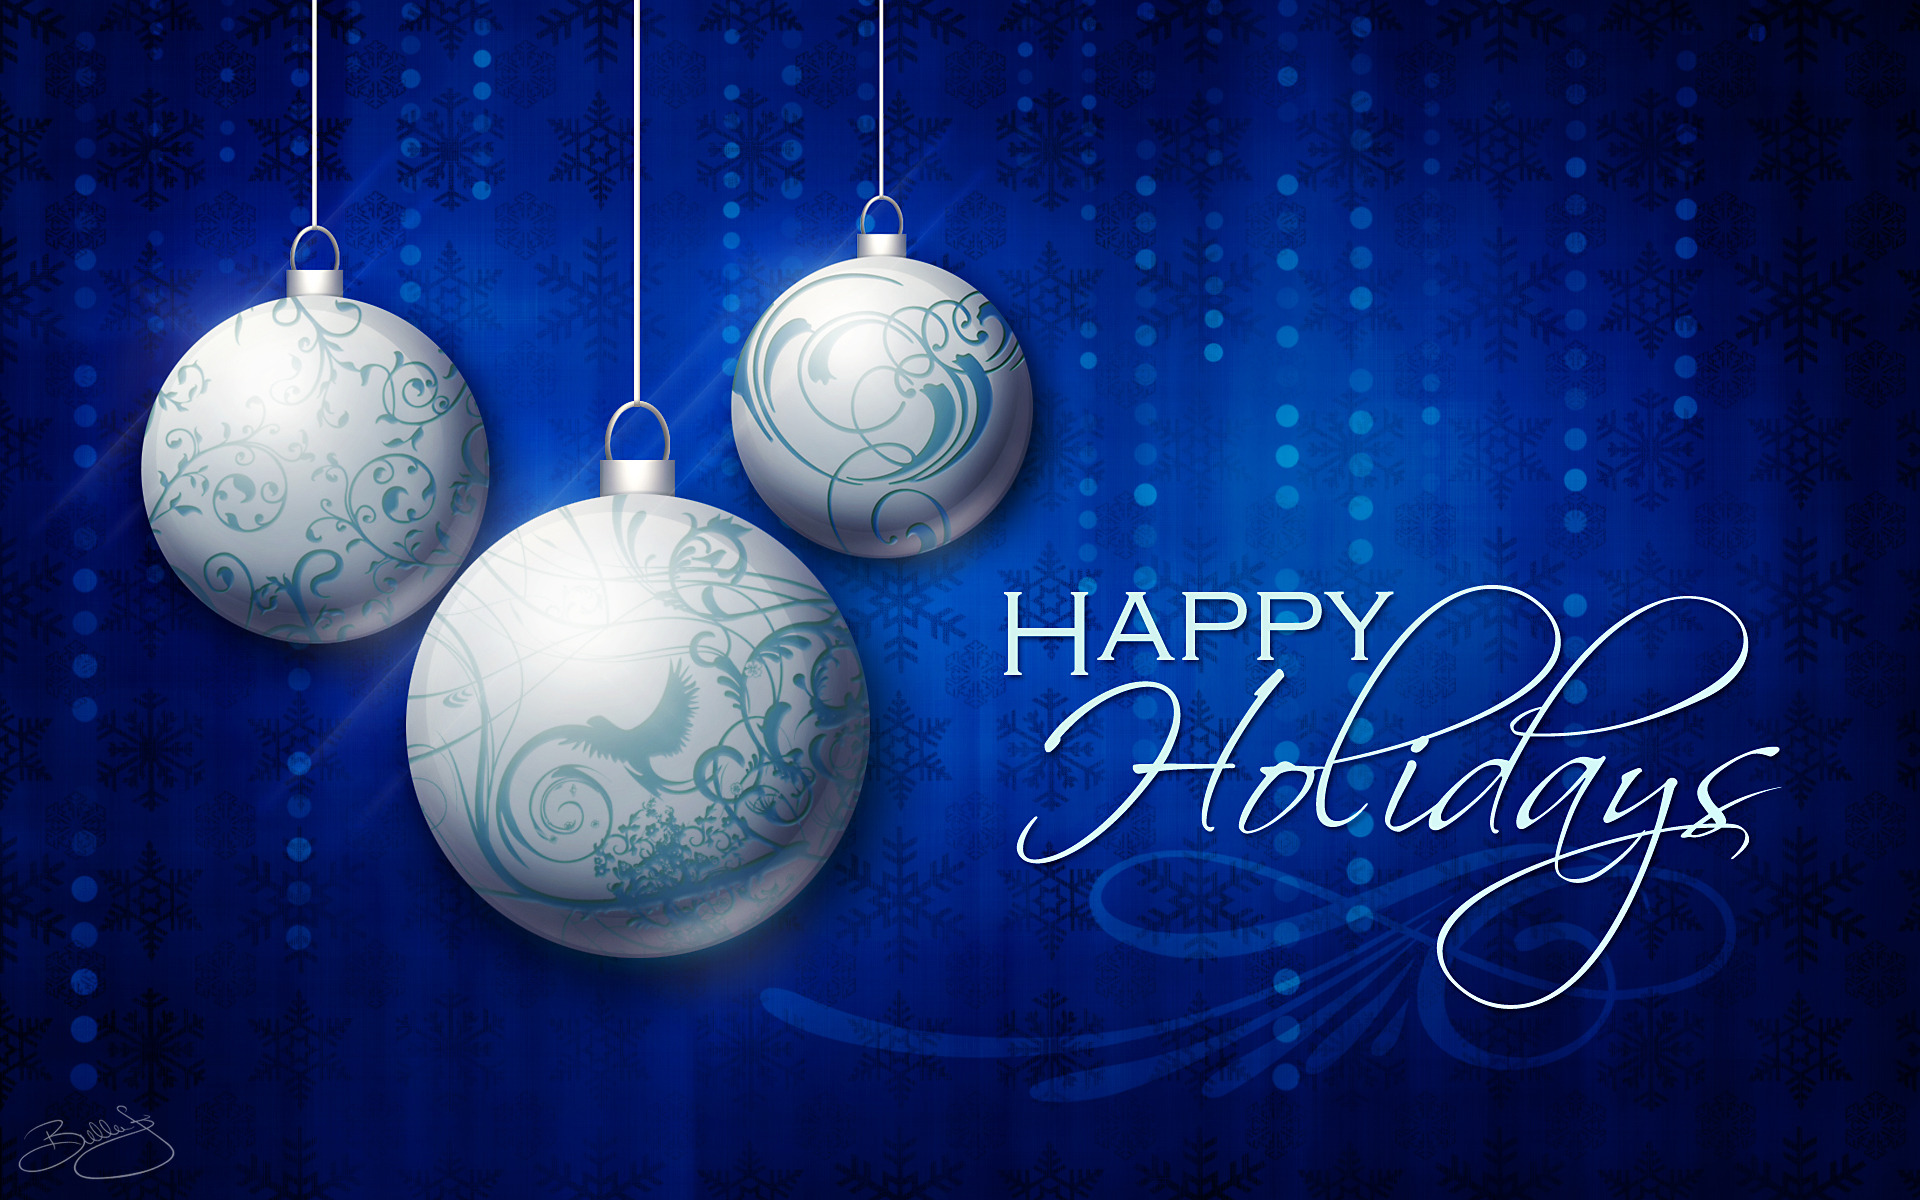 Happy Holidays from BHM Healthcare Solutions